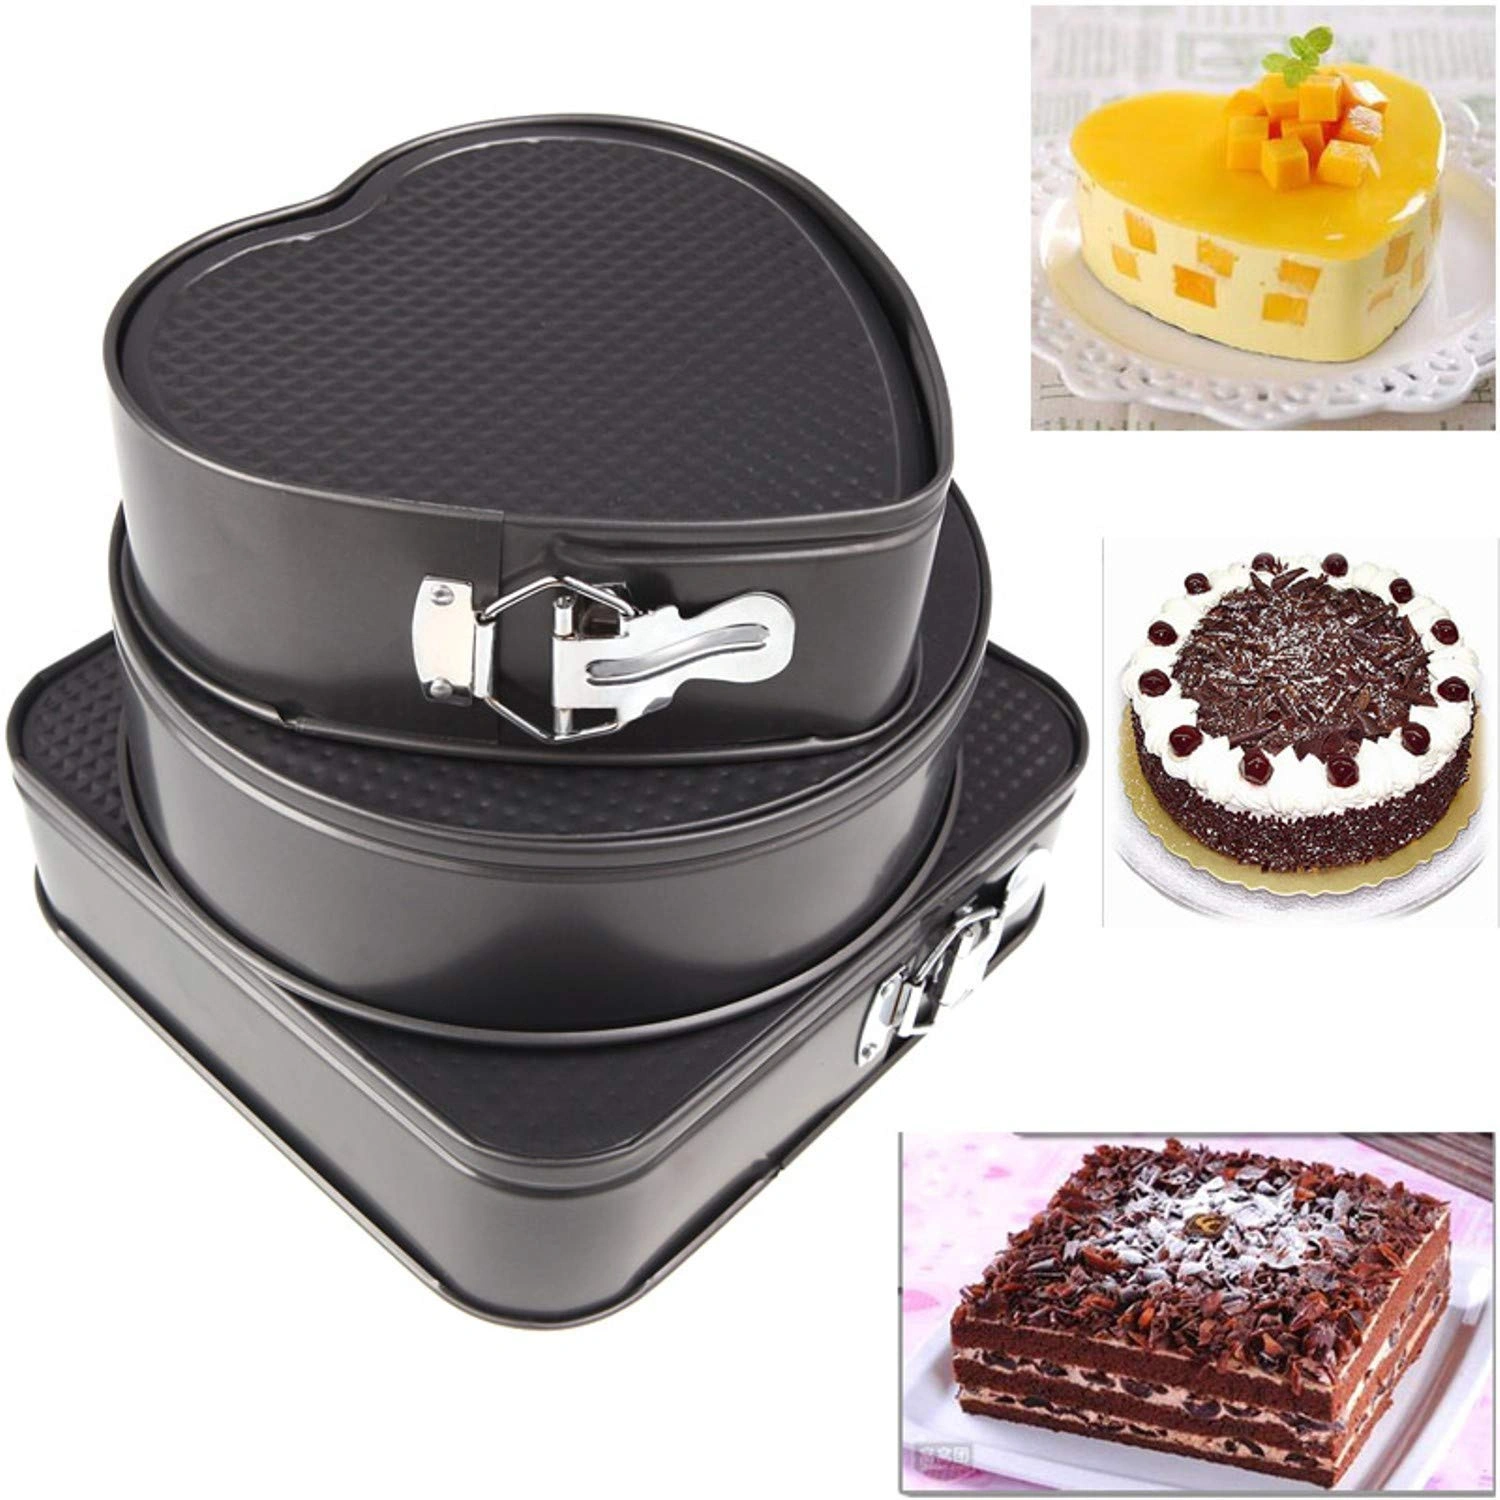 Buy Perfect Non-Stick Baking Pan Cake Tin Moulds Set of 3 At Sehgall - G141  | Sehgall